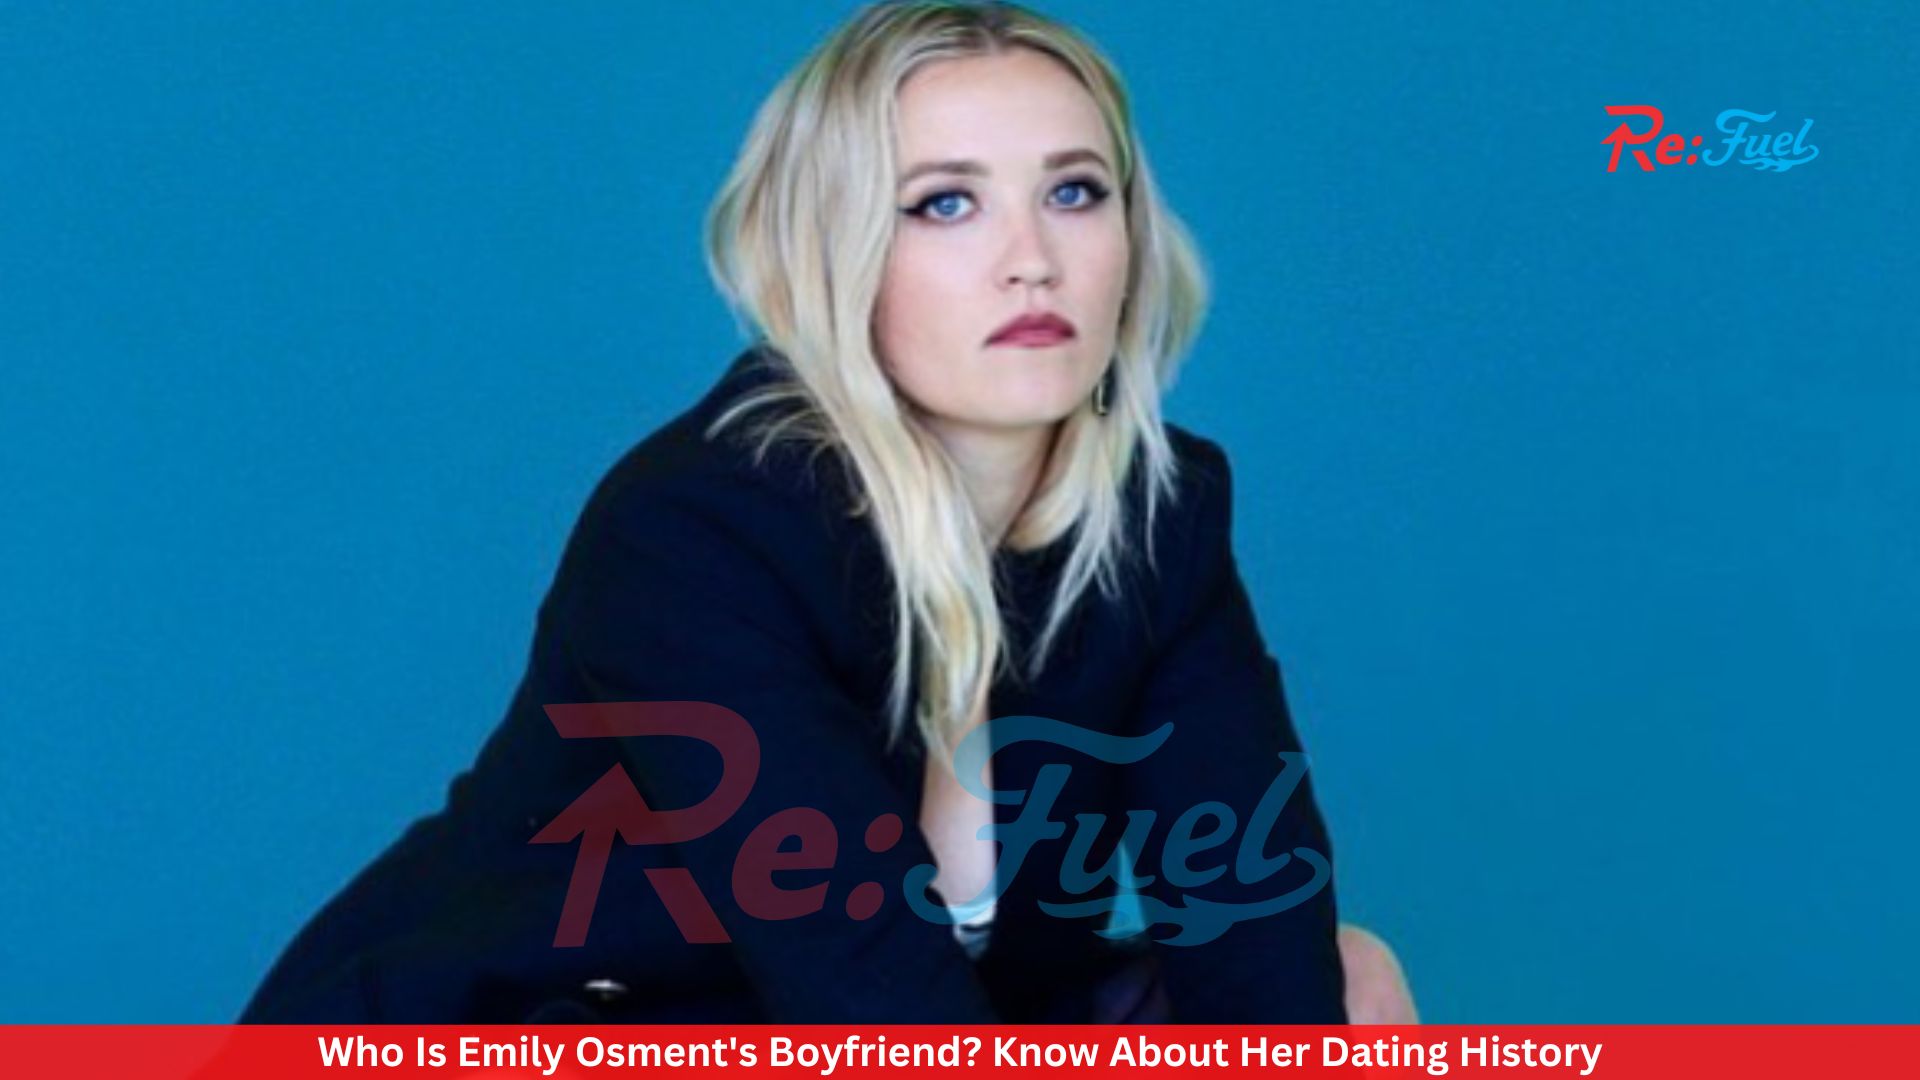 Who Is Emily Osment's Boyfriend? Know About Her Dating History